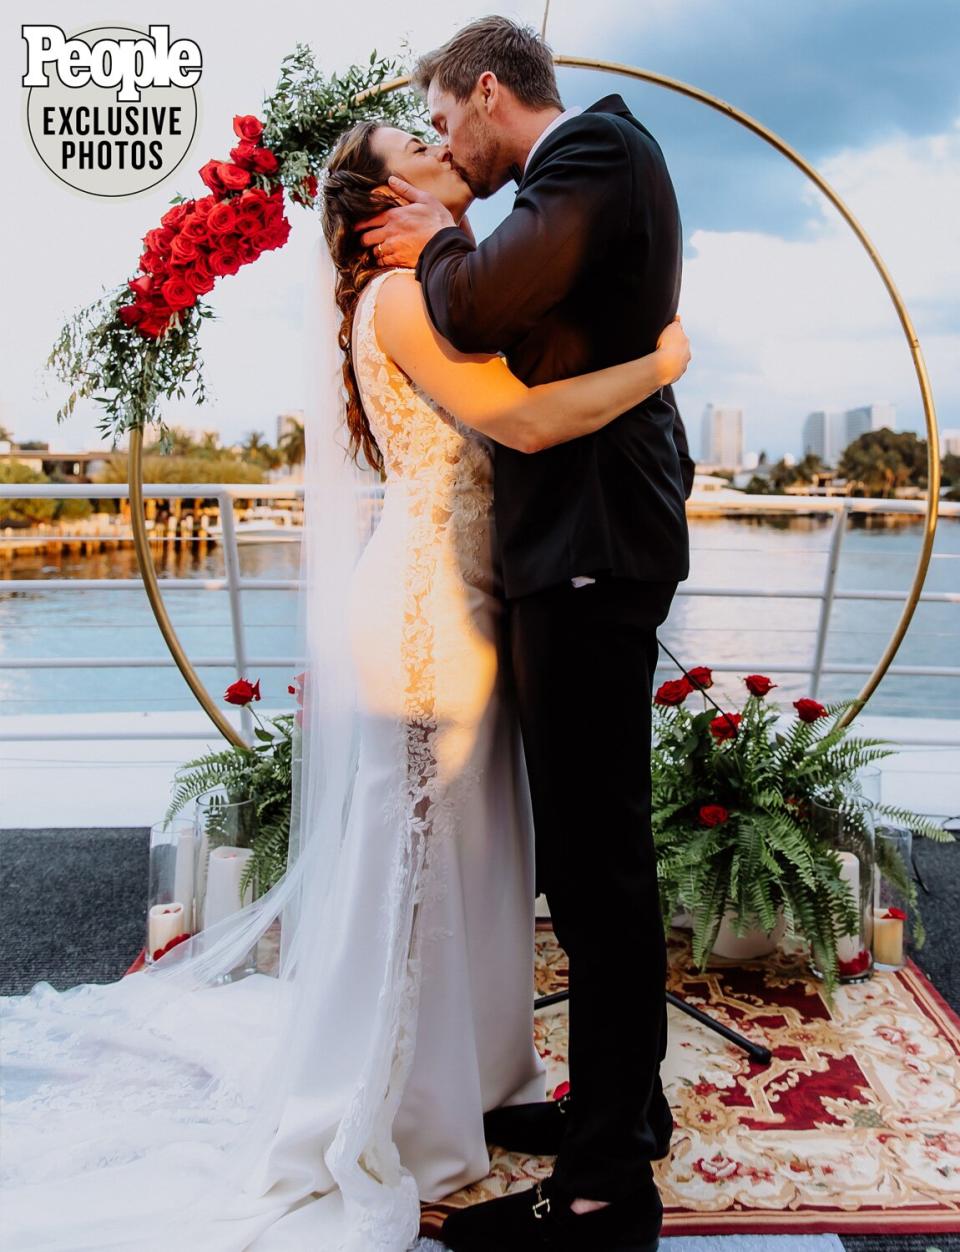 Country Singer and 'The Voice' Alum Taryn Papa Marries Fiancé Brett Ehmen: 'We Have Each Other Forever'